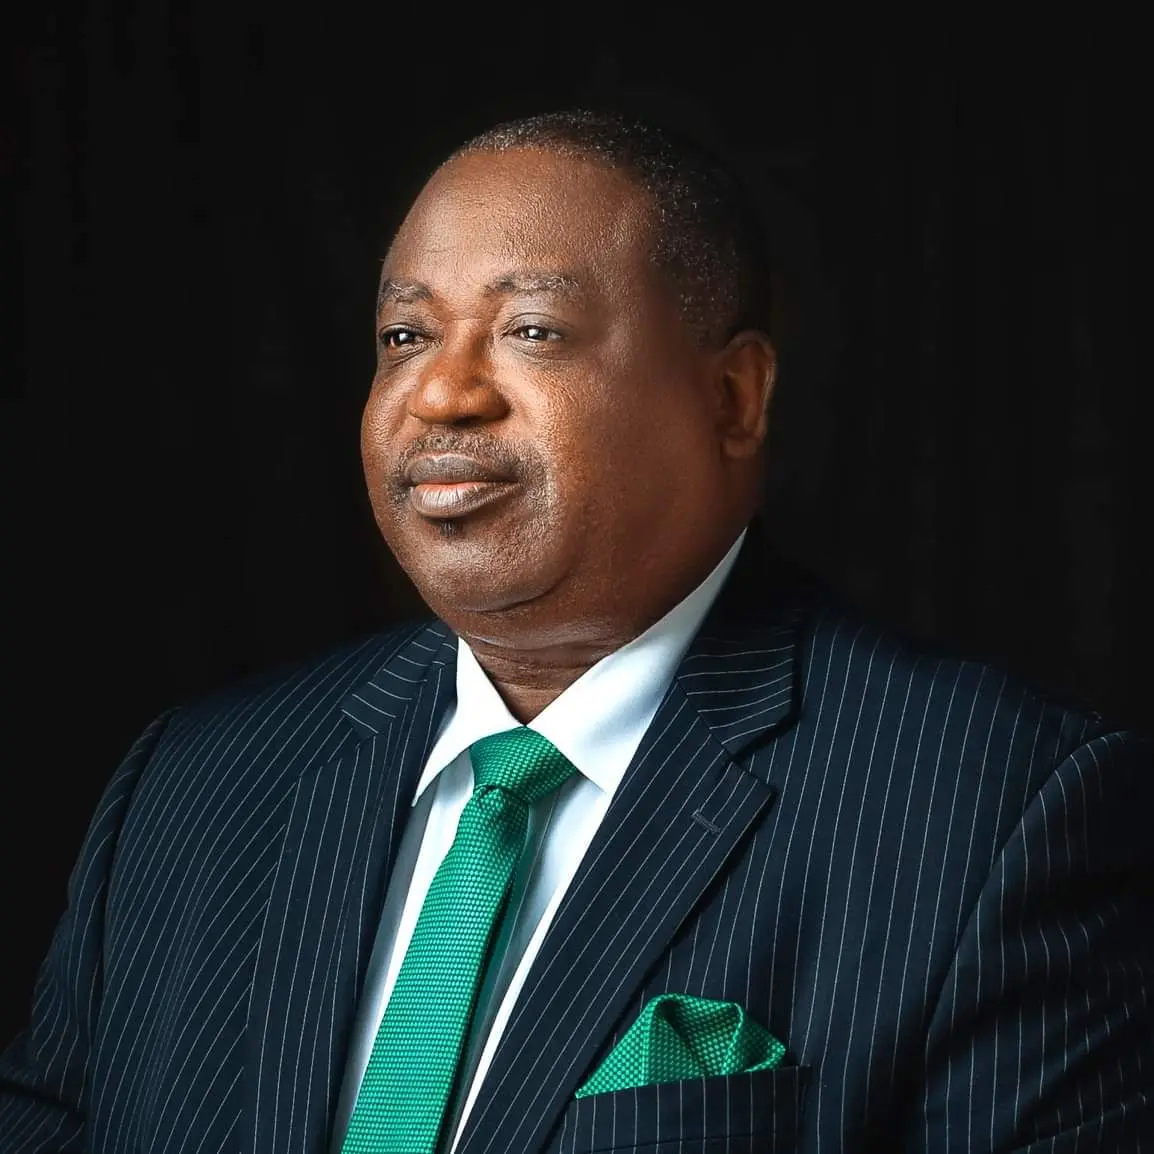 “There’s a Deliberate Plan to Wipe Out Plateau People” – Gov. Mutfwang